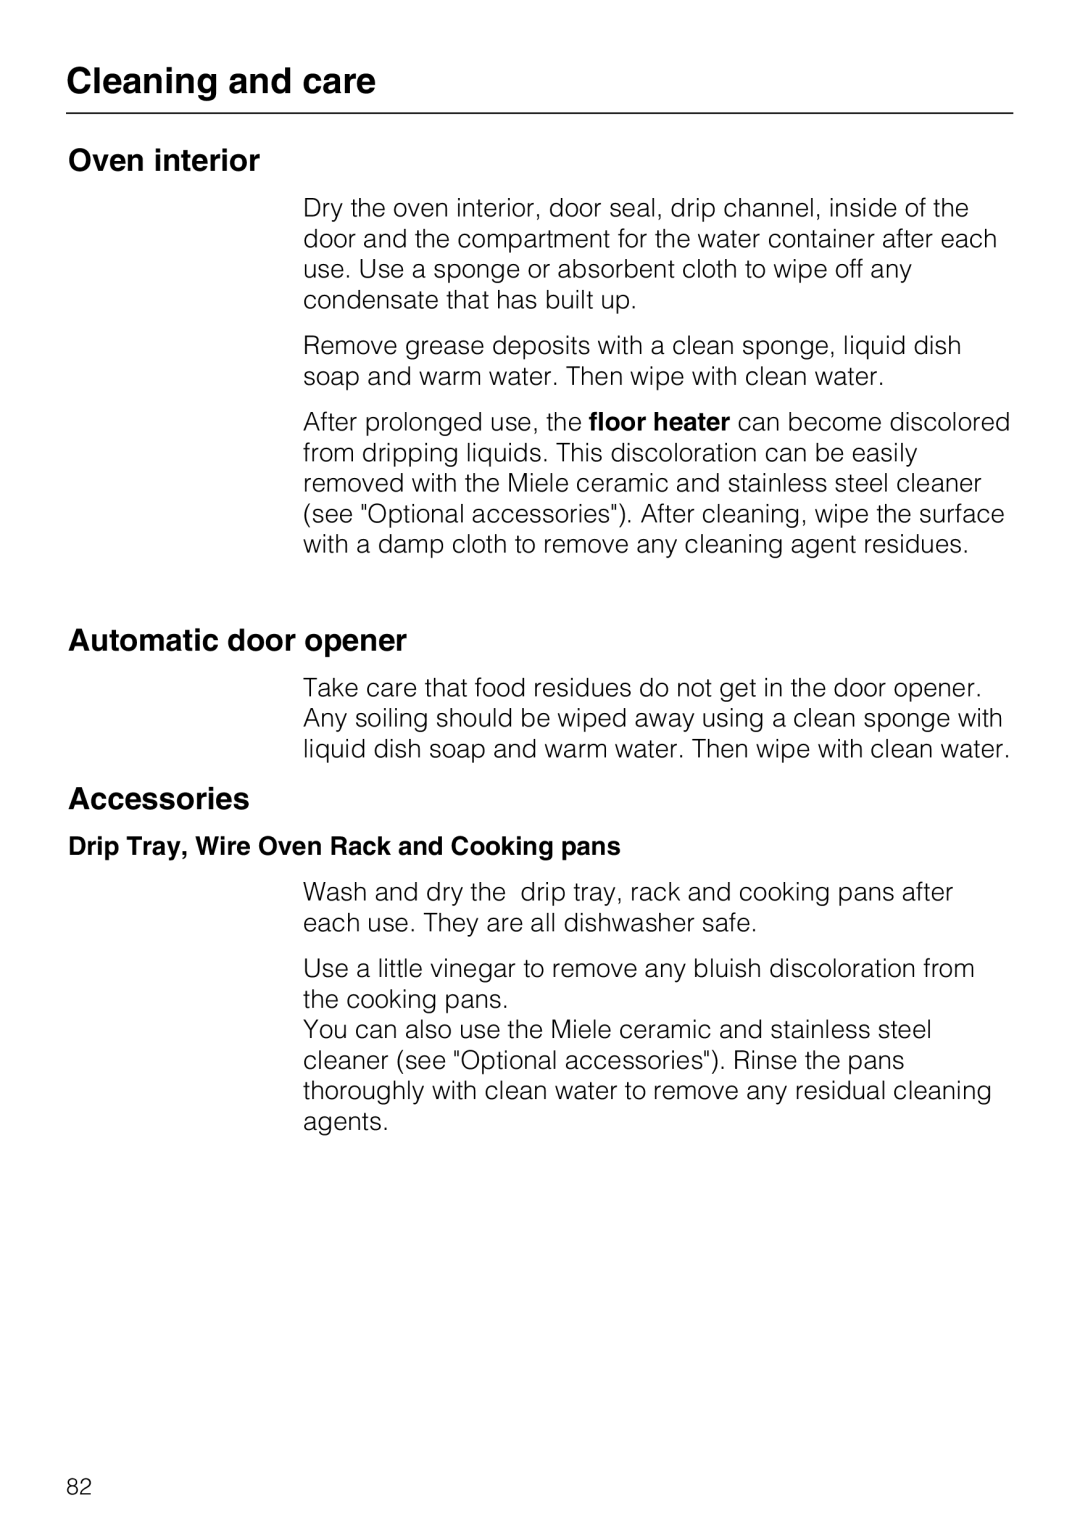 Miele 09 800 830 installation instructions Oven interior, Automatic door opener, Accessories, Cleaning and care 